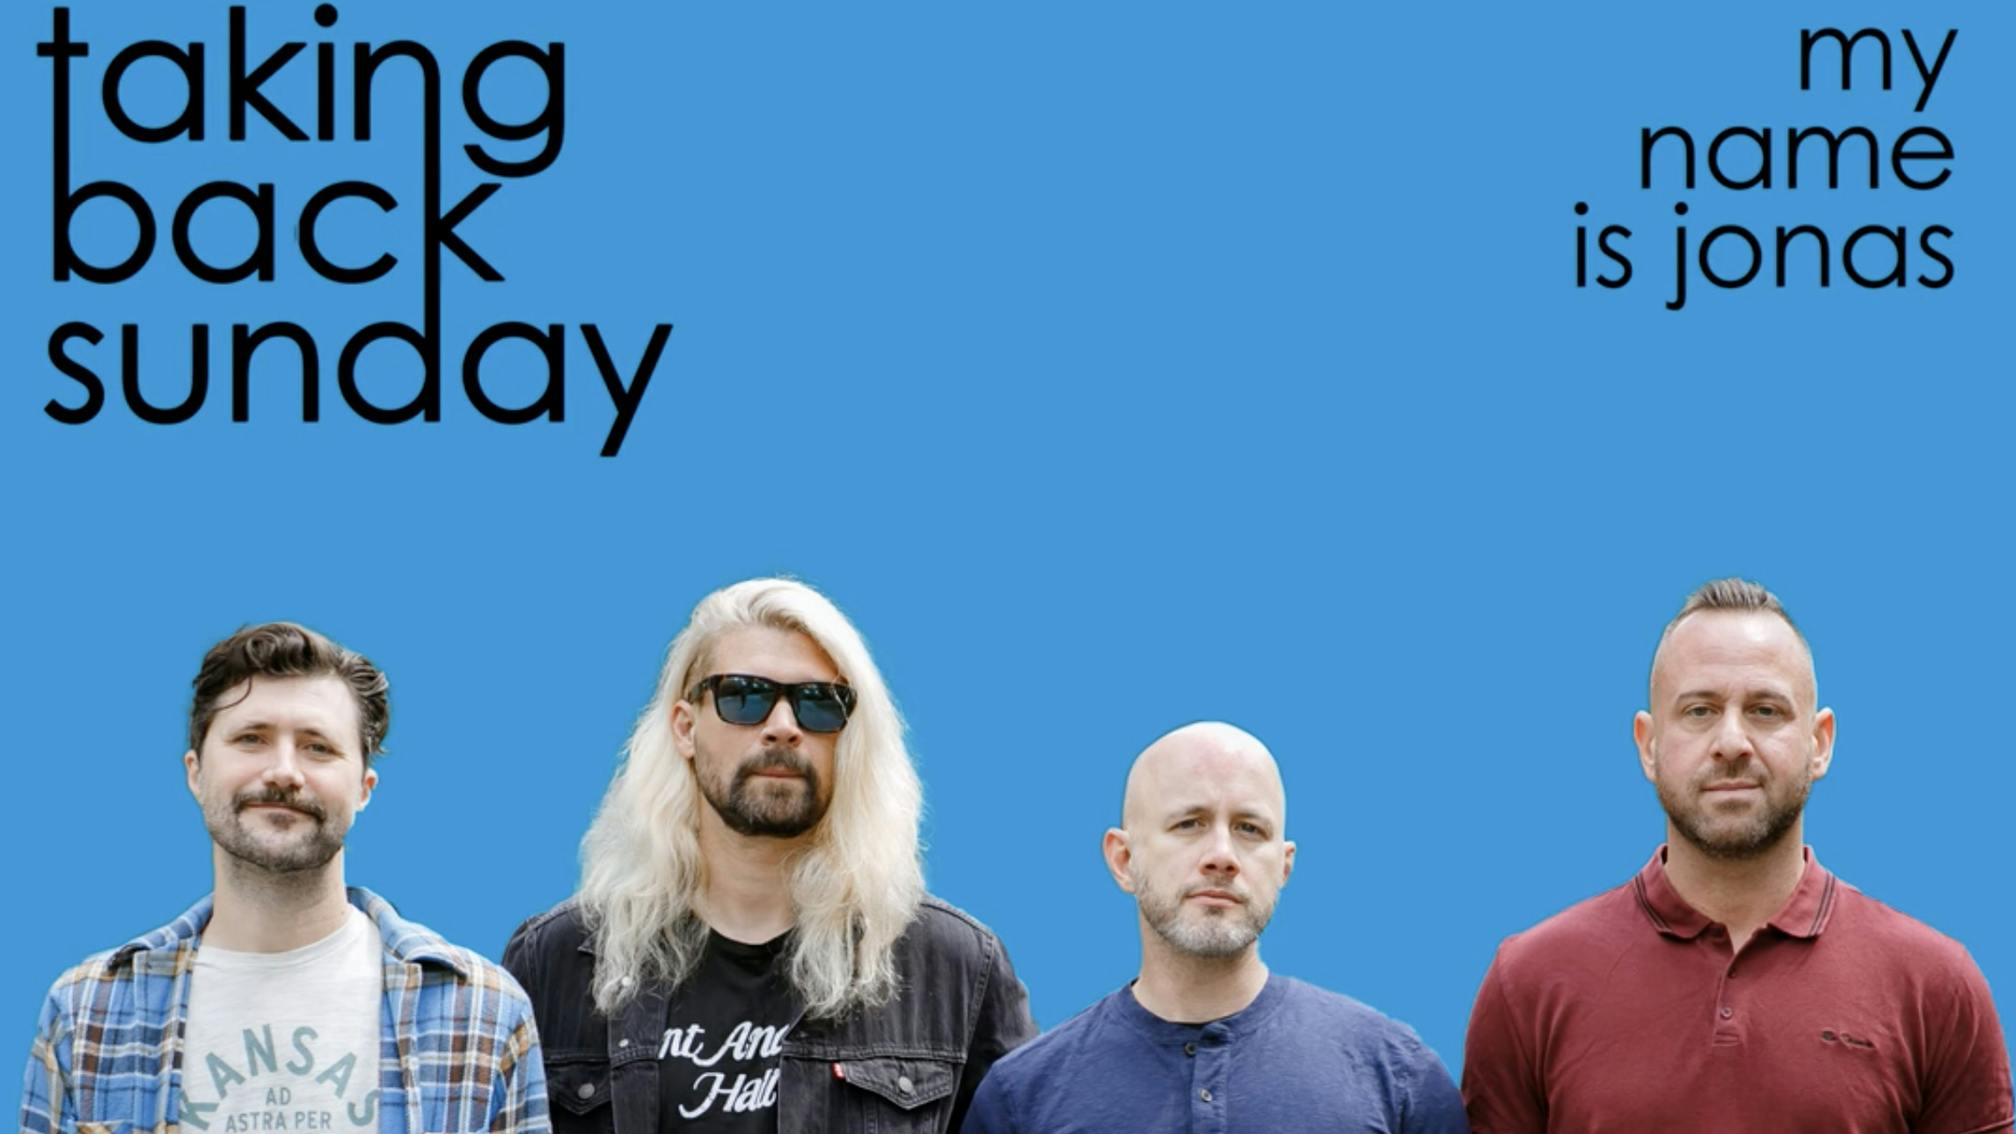 Listen: Taking Back Sunday have covered Weezer's My Name Is Jonas